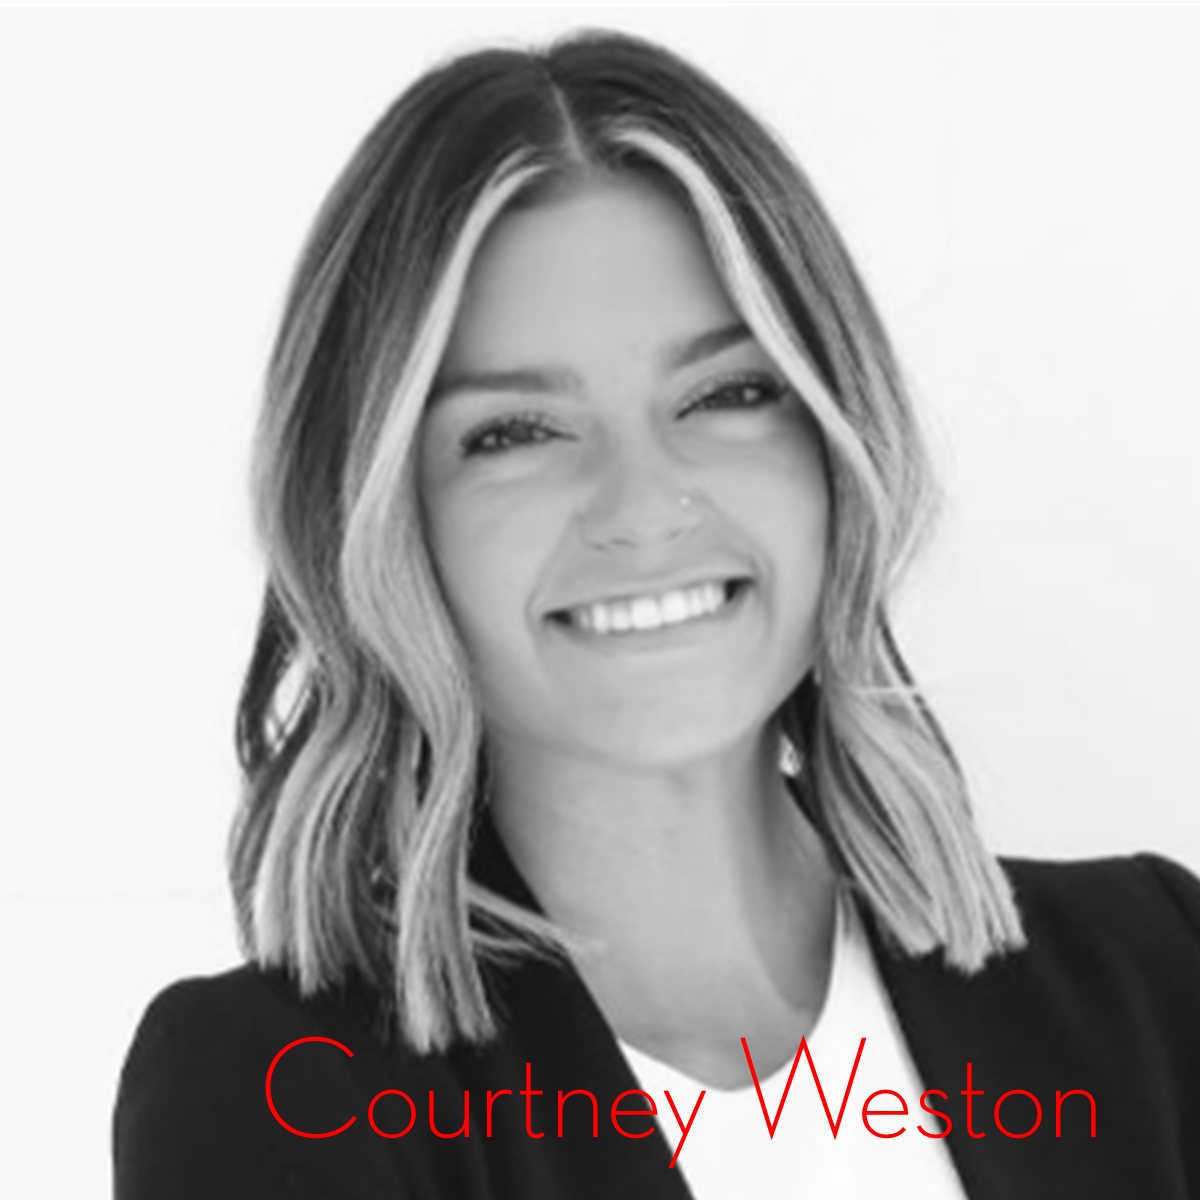 Courtney Weston grayscale with name